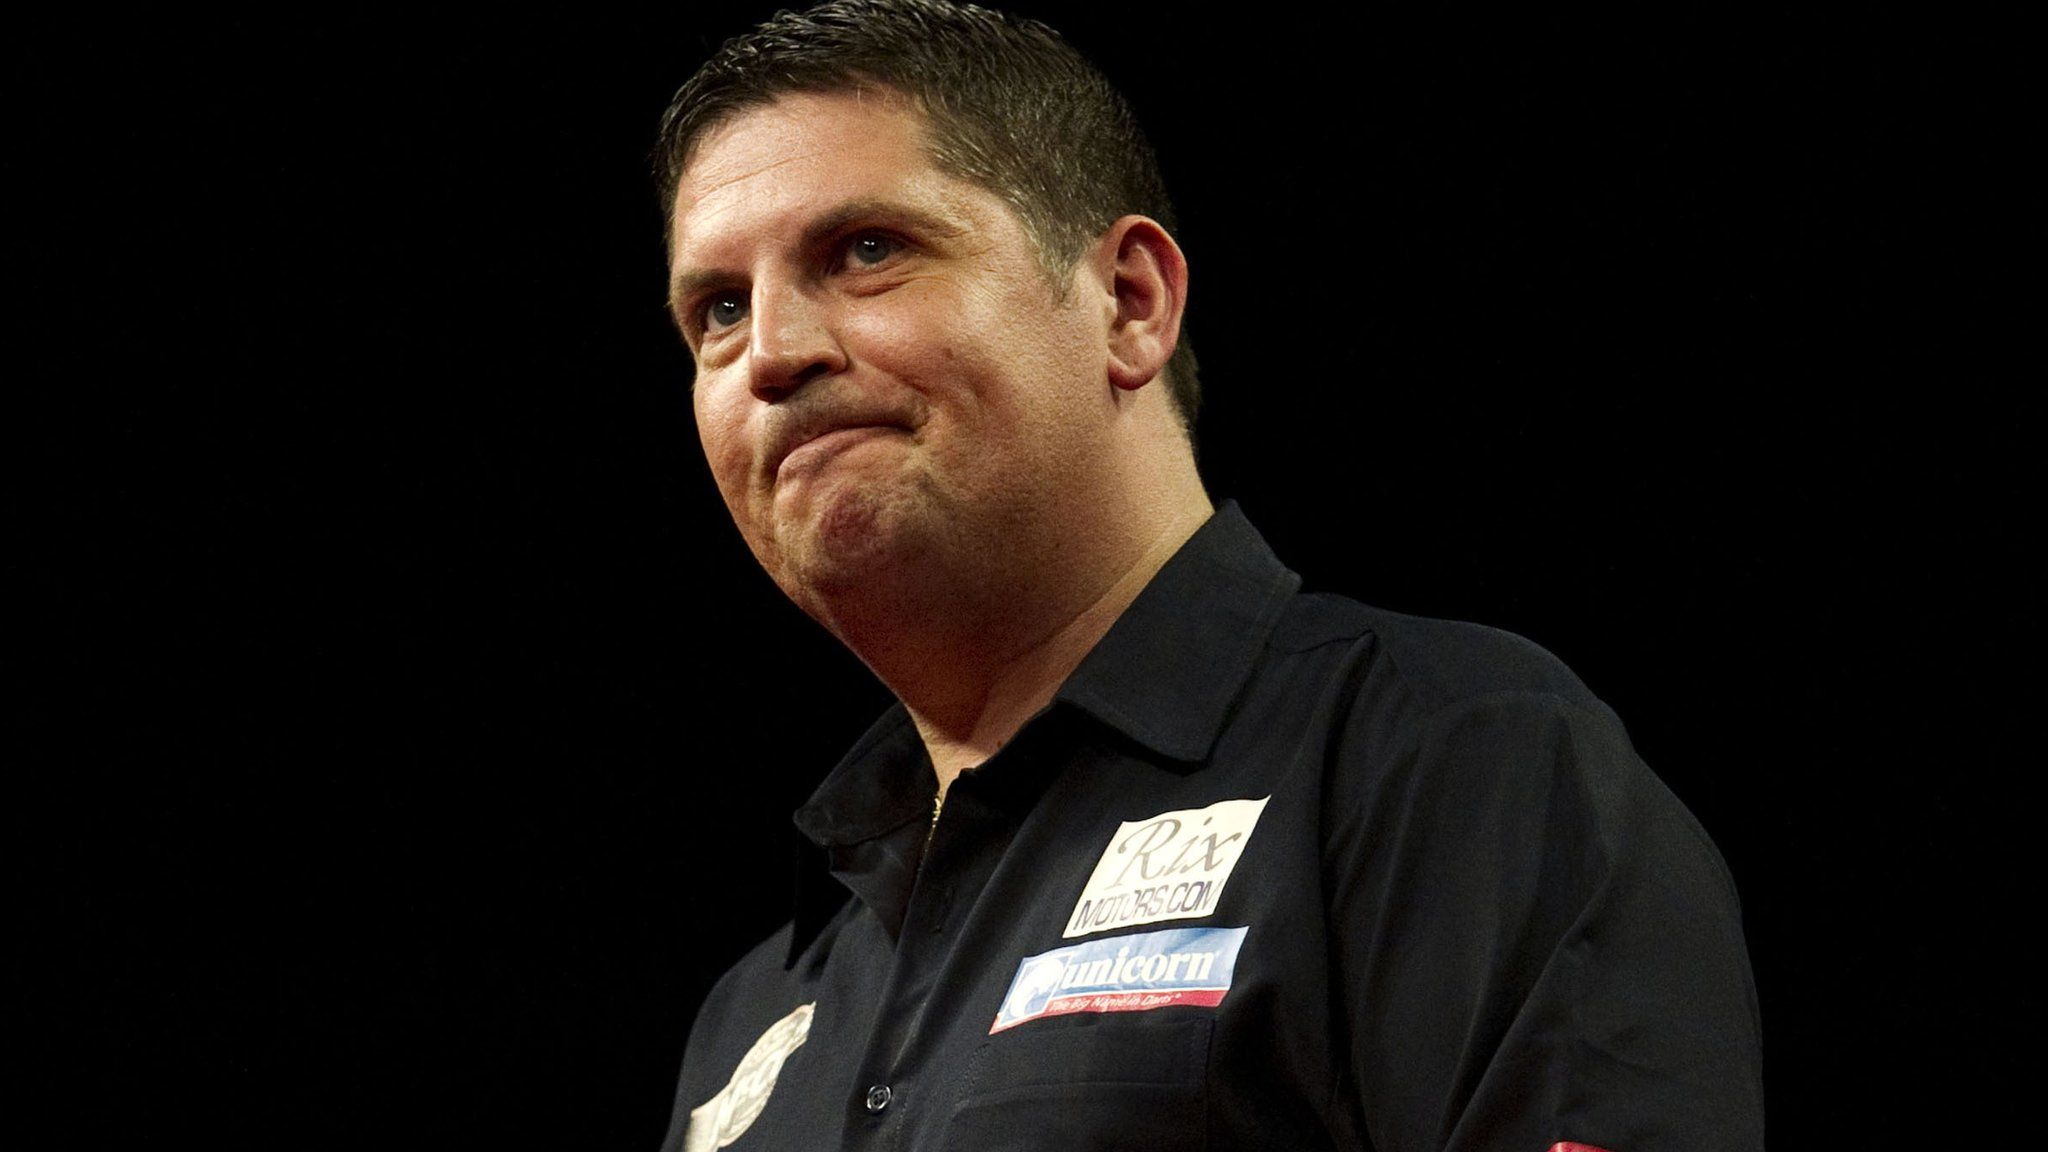 Anderson defeated Phil Taylor to win his first world title